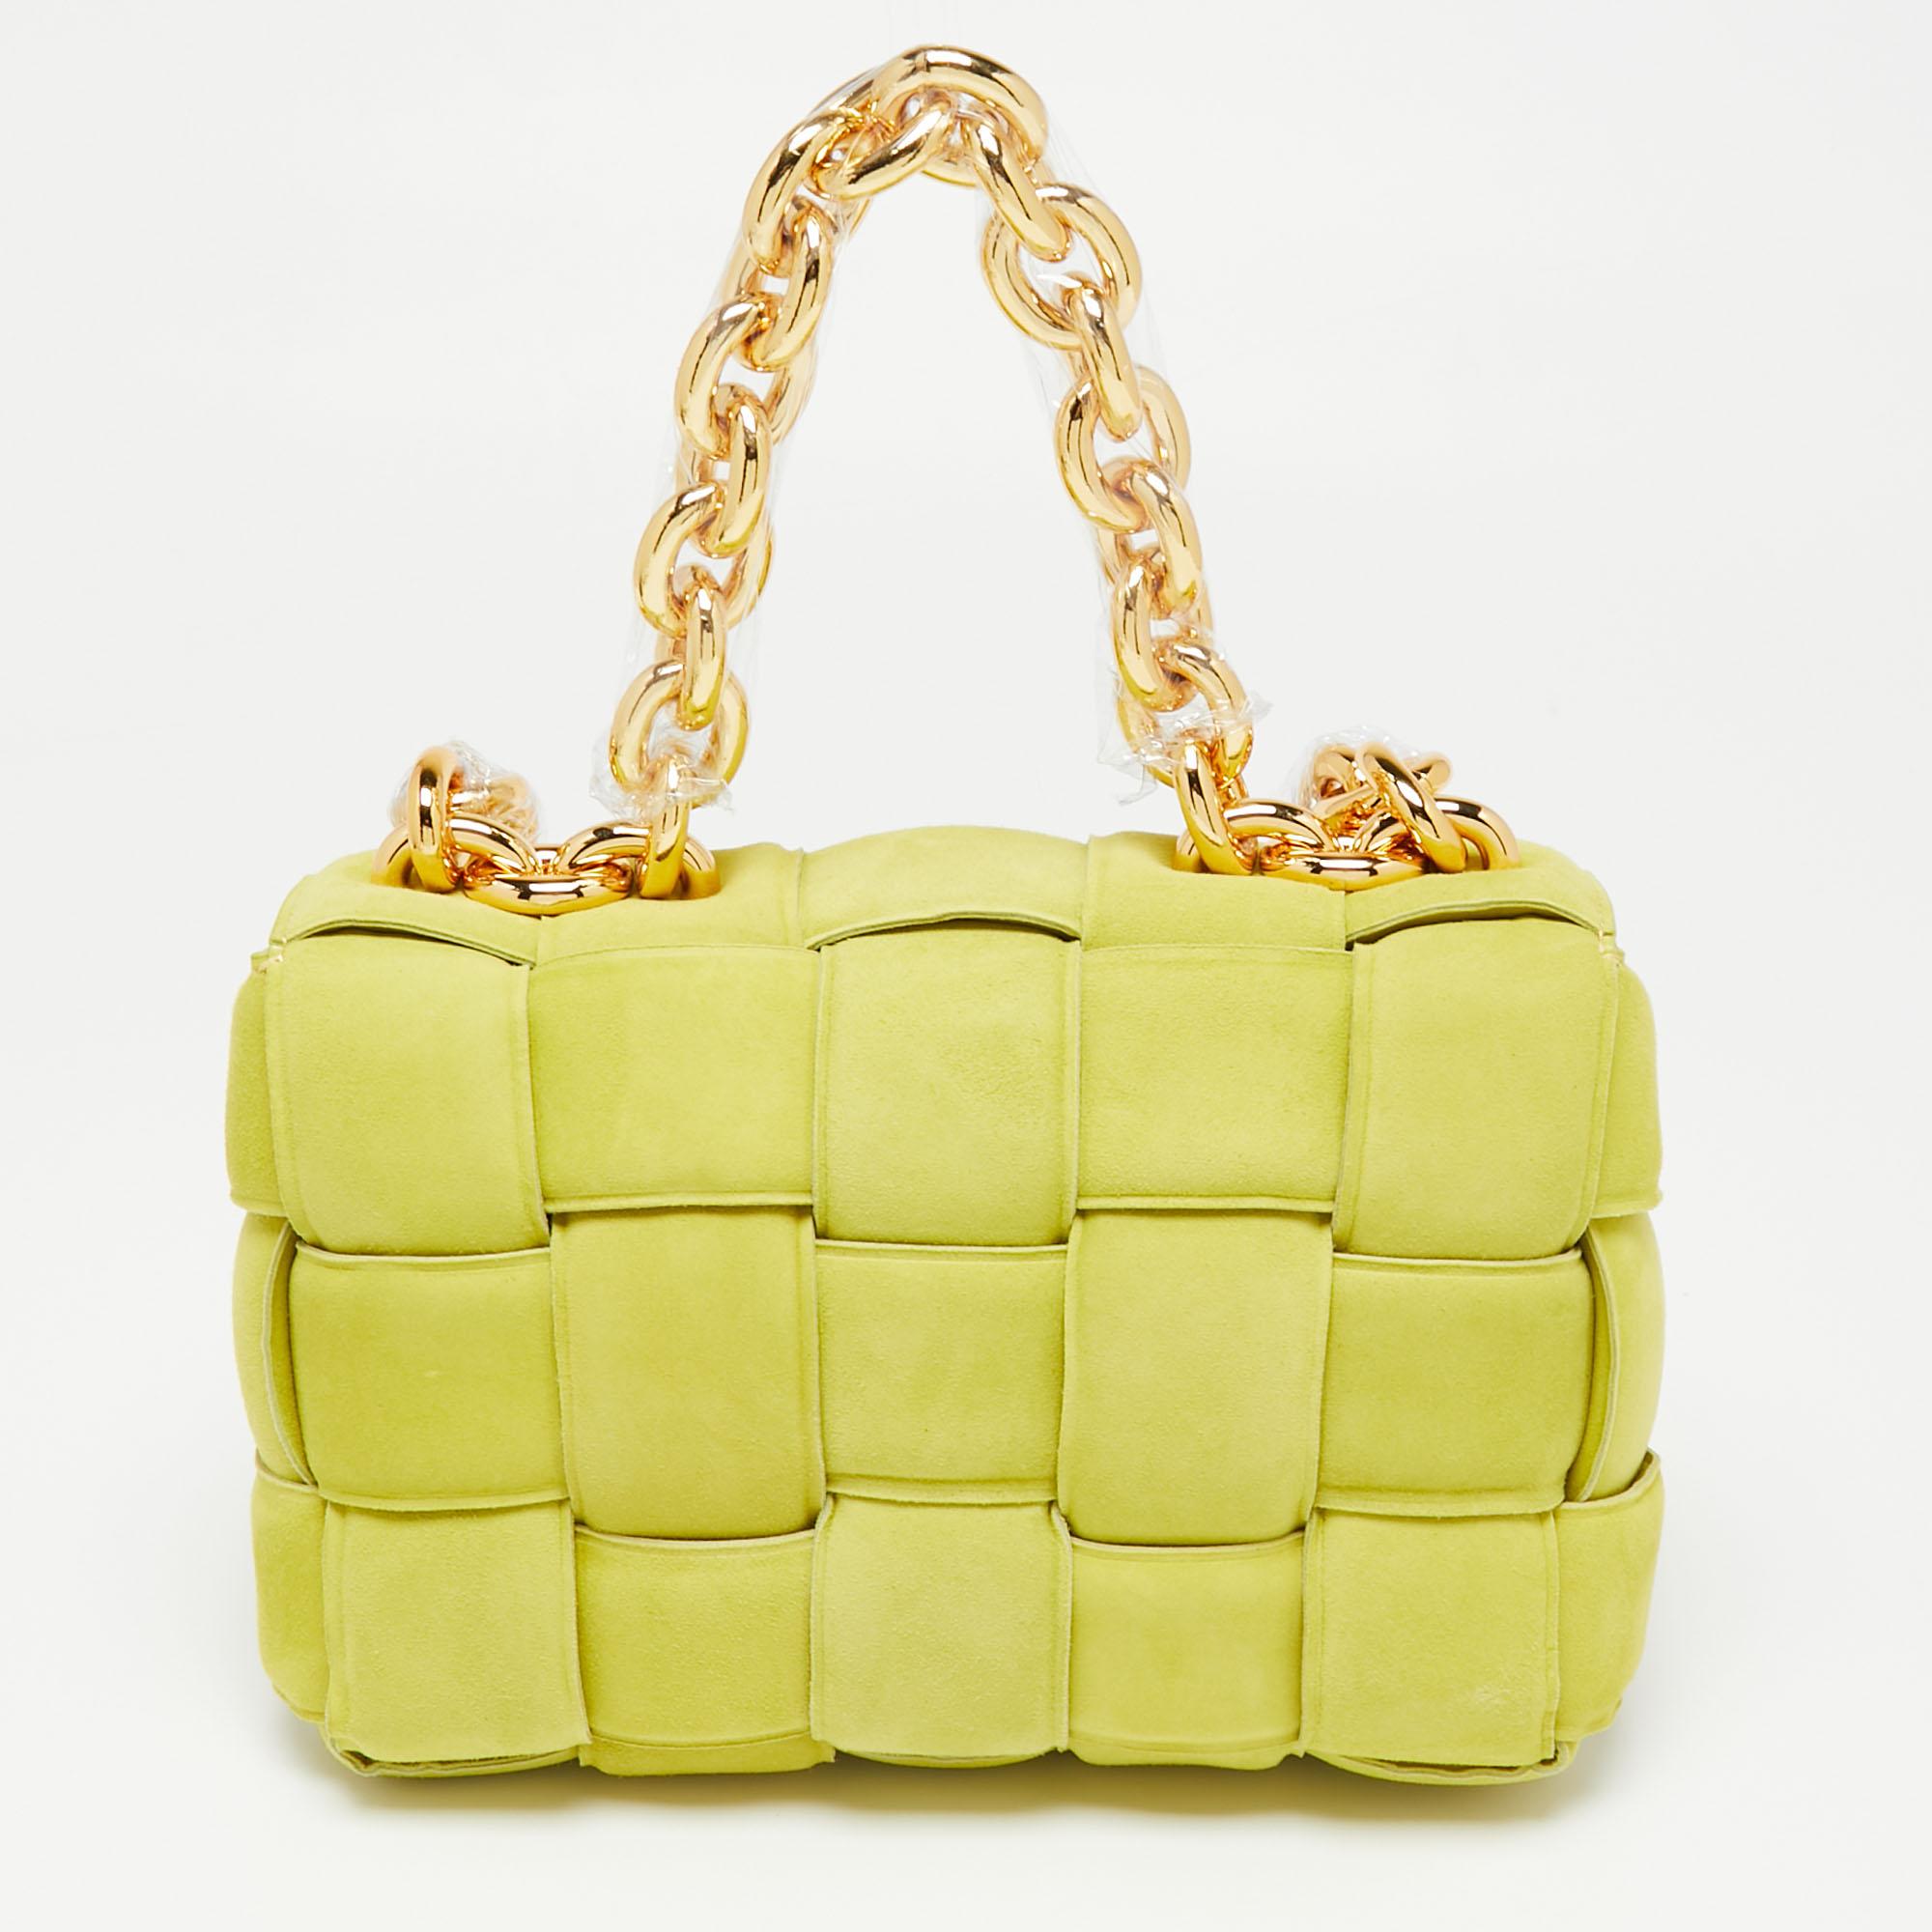 This lovely bag on many fashionistas' minds is the Cassette bag from the house of Bottega Veneta. We have here the one in yellow suede, flaunting a padded weave and chunky chain handles. The insides are sized to fit your phone, wallet, and make-up